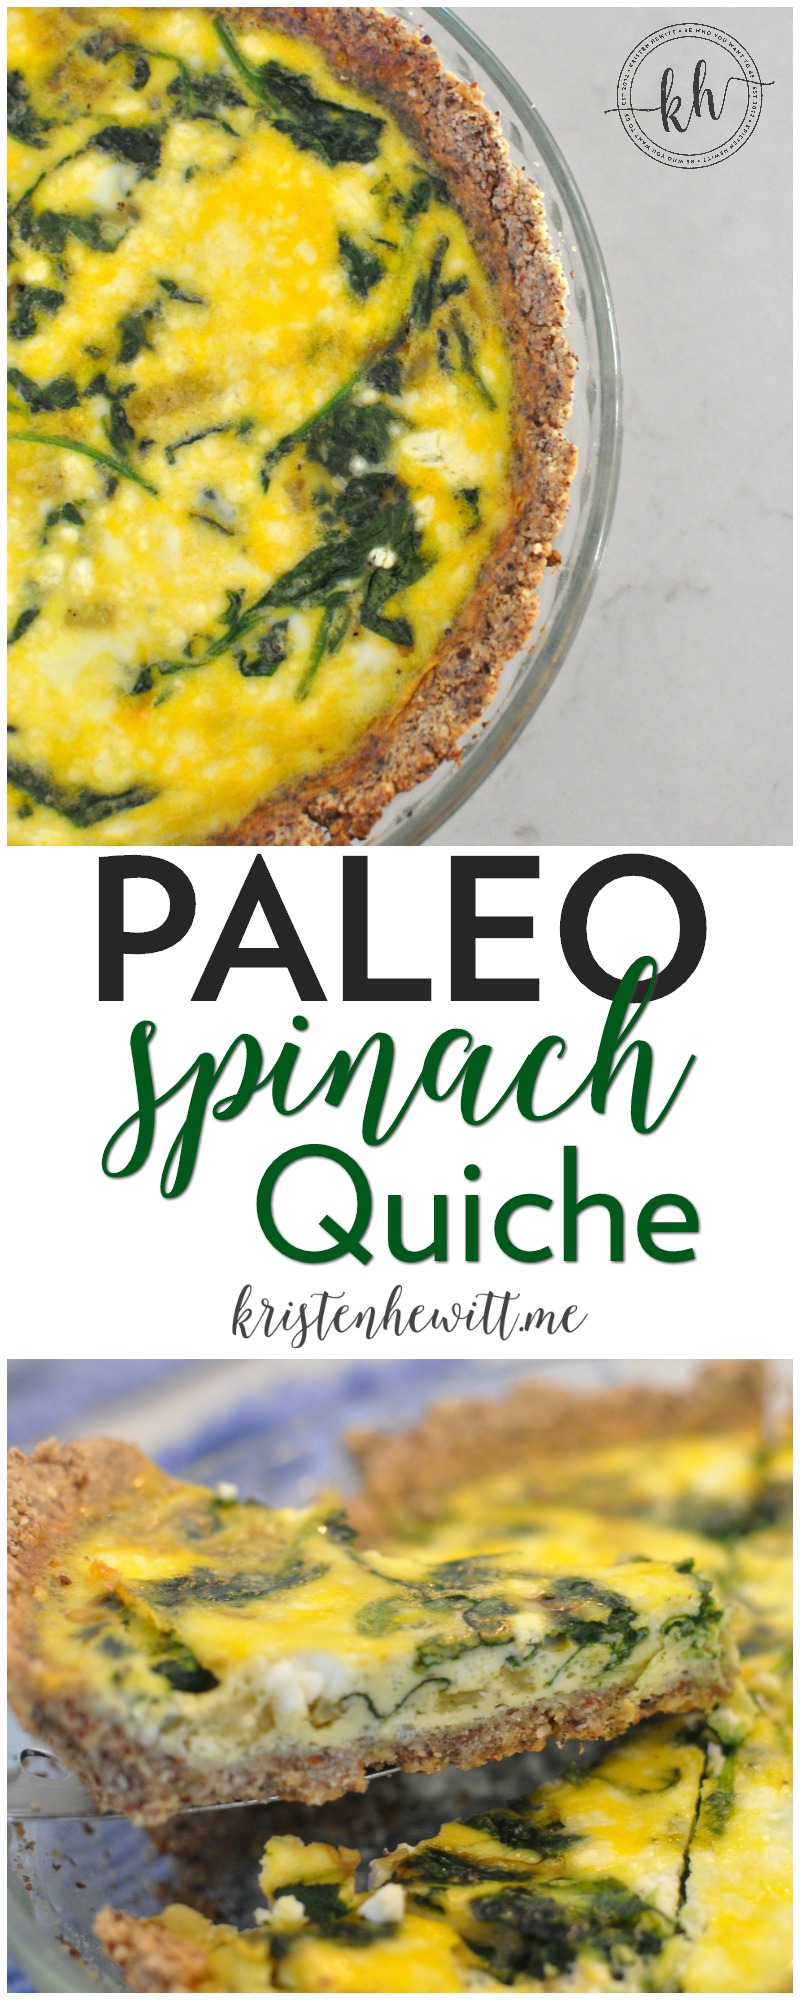 Looking for a delicious paleo breakfast recipe? Then try this paleo spinach quiche! It's perfect for a brunch and really easy to make. 